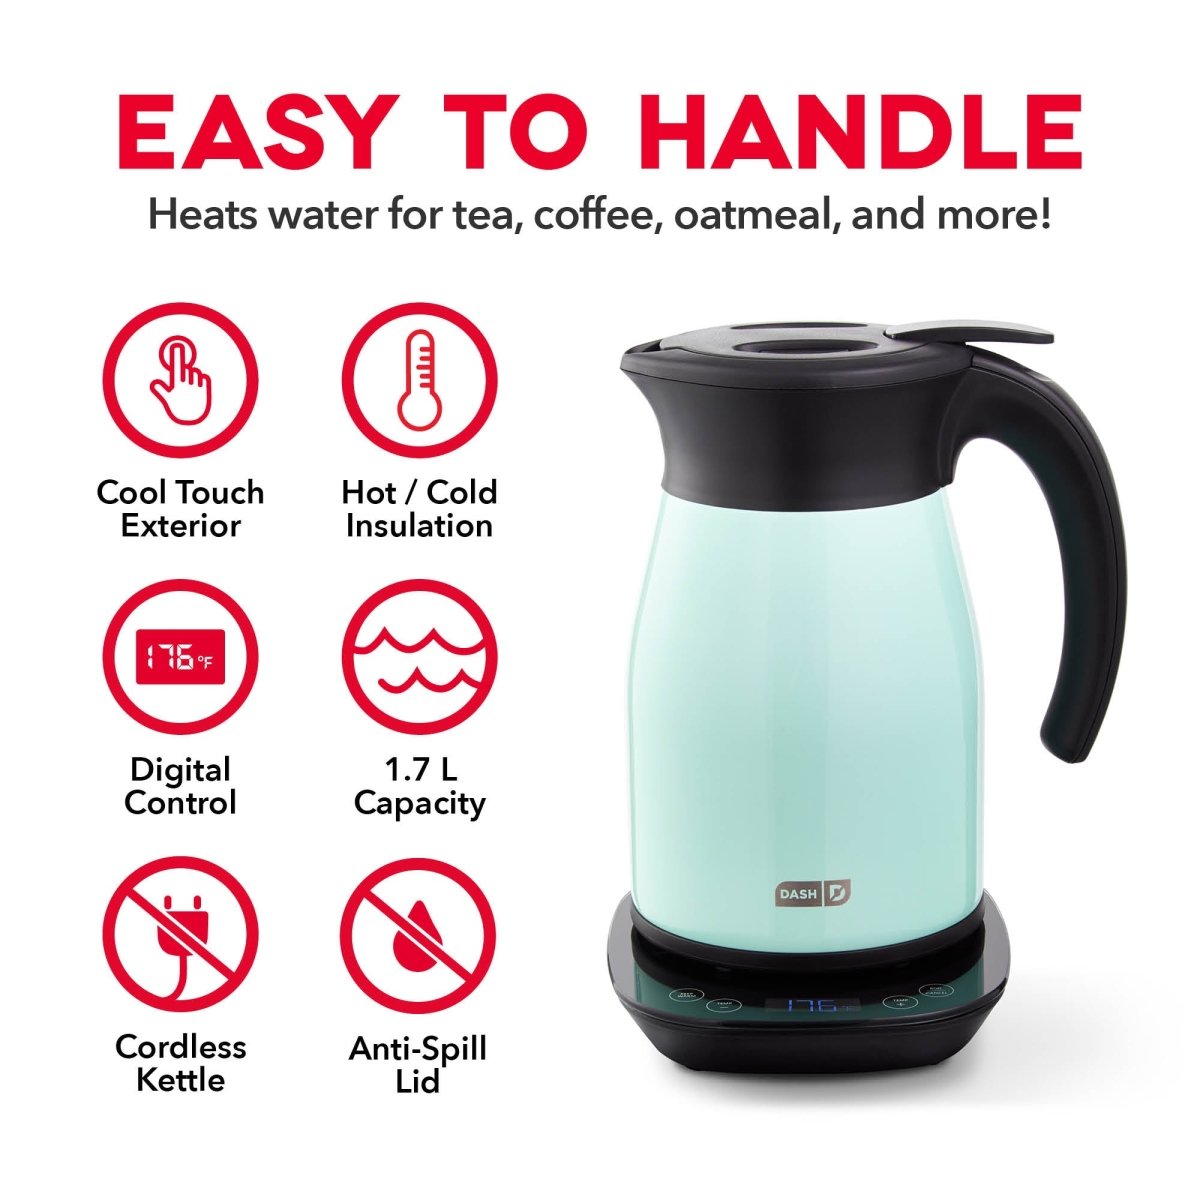 Dash Insulated Electric Kettle - lily & onyx